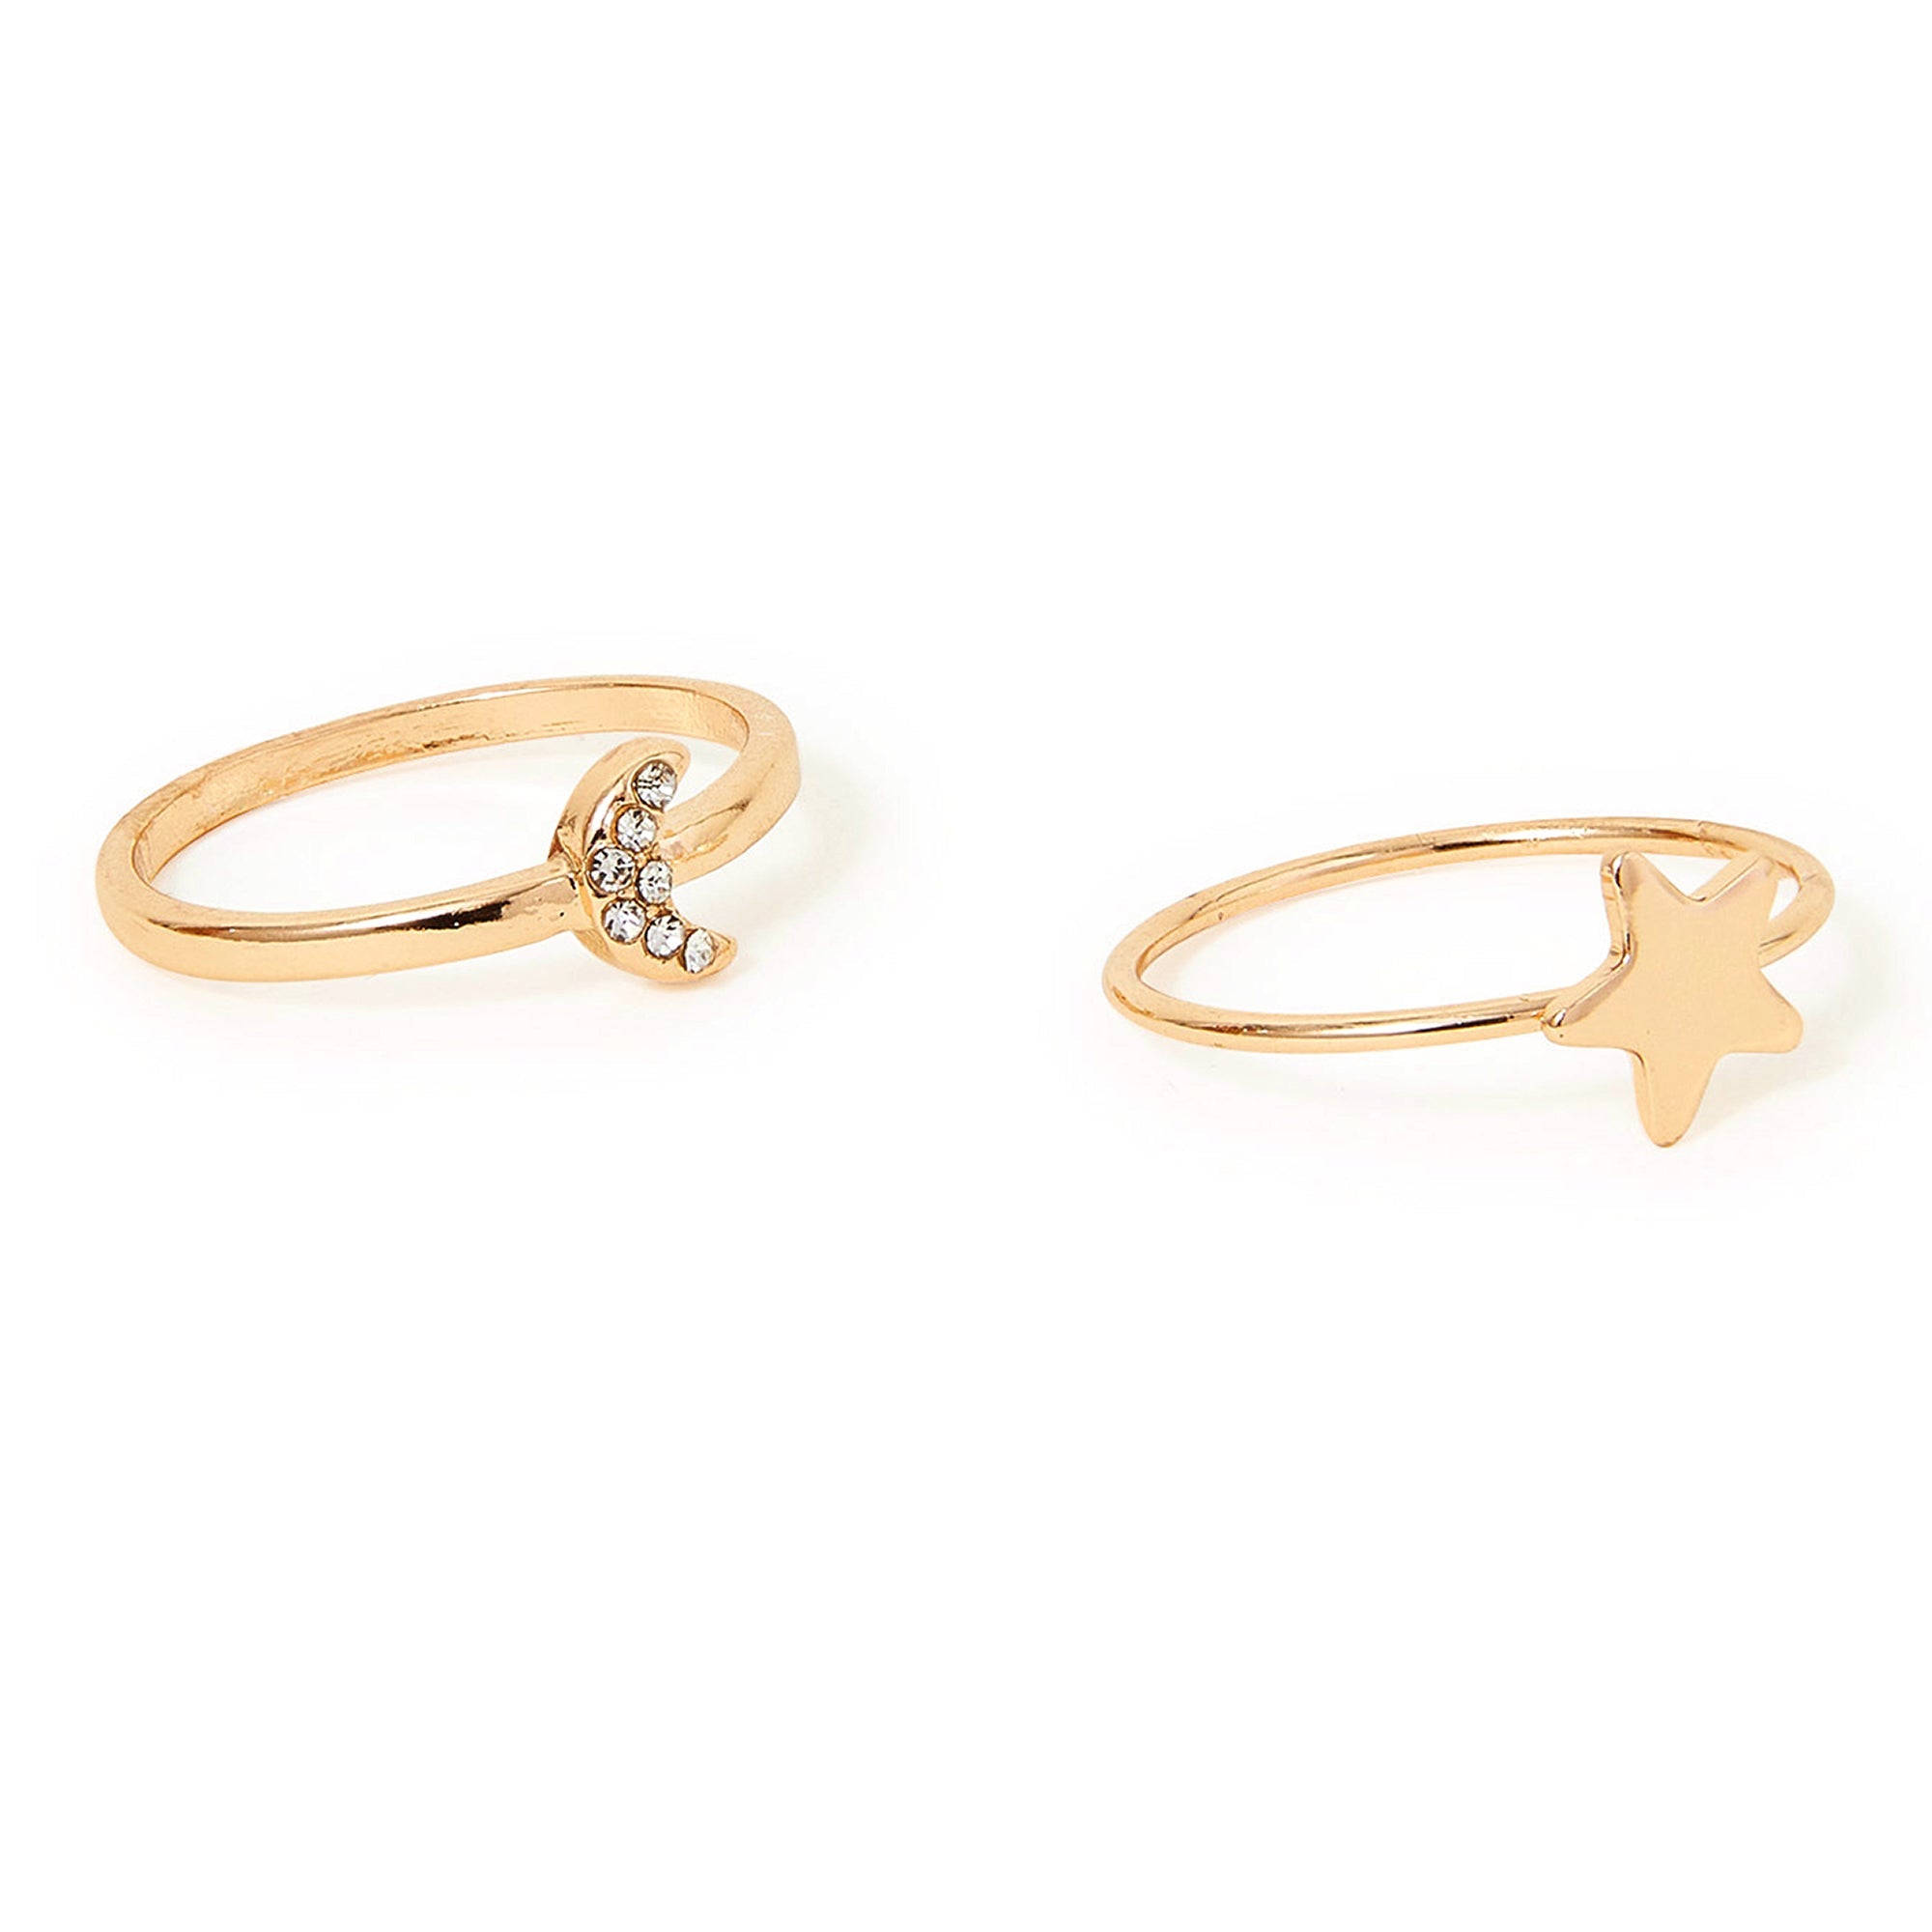 Accessorize London Women's Gold Star And Moon Rings Set Of Two-Medium